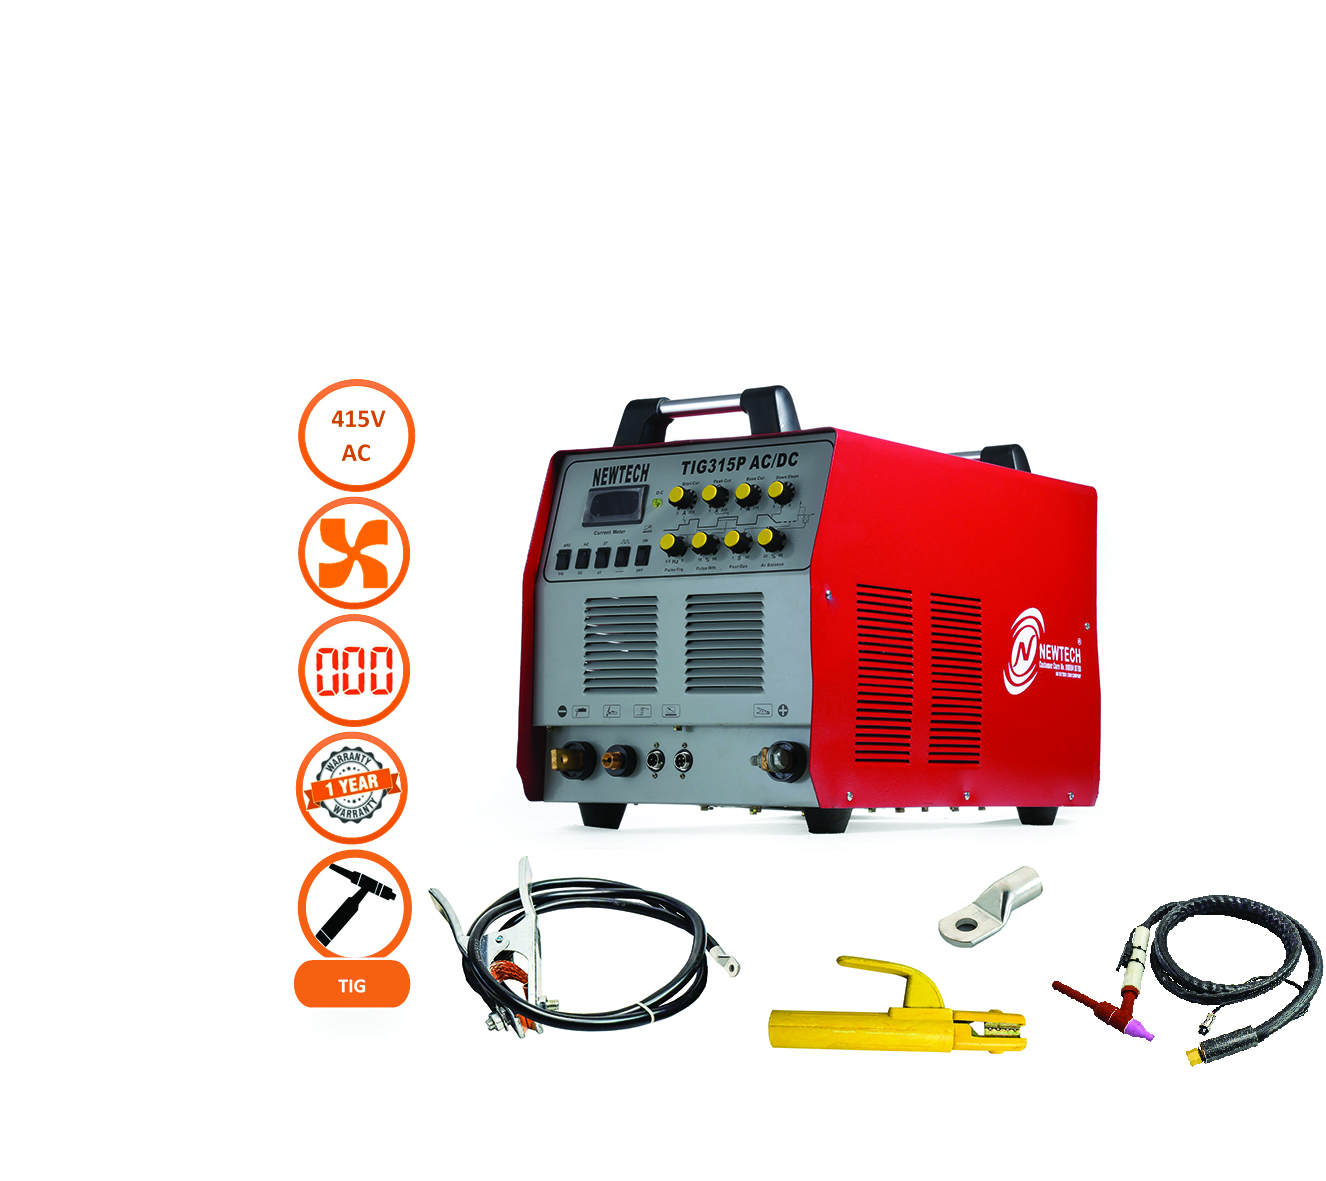 TIG 315 ACDC Welding Machine by Newtech Technology in Surat - India